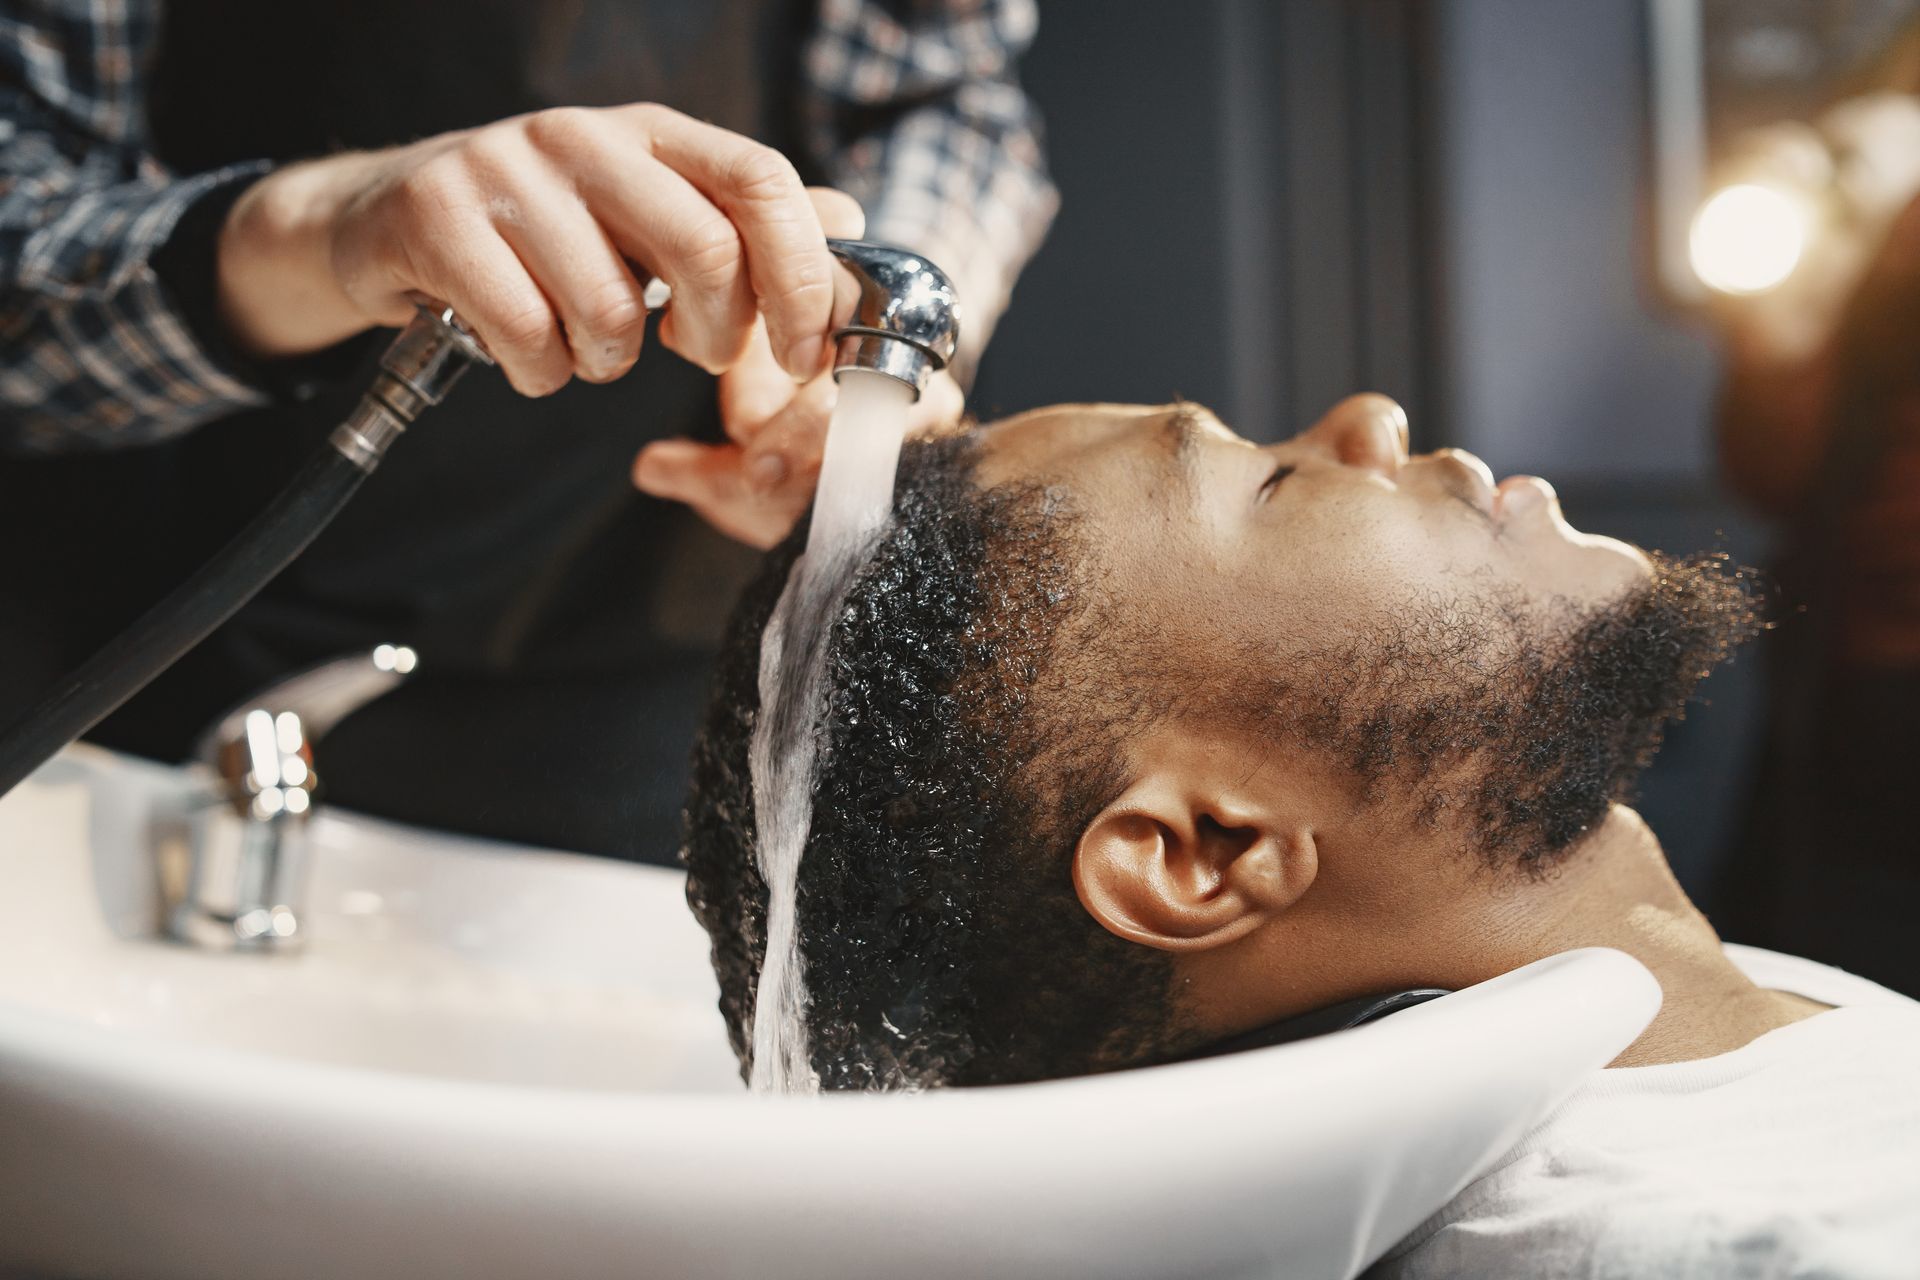 A man is getting his hair washed at a barber shop.